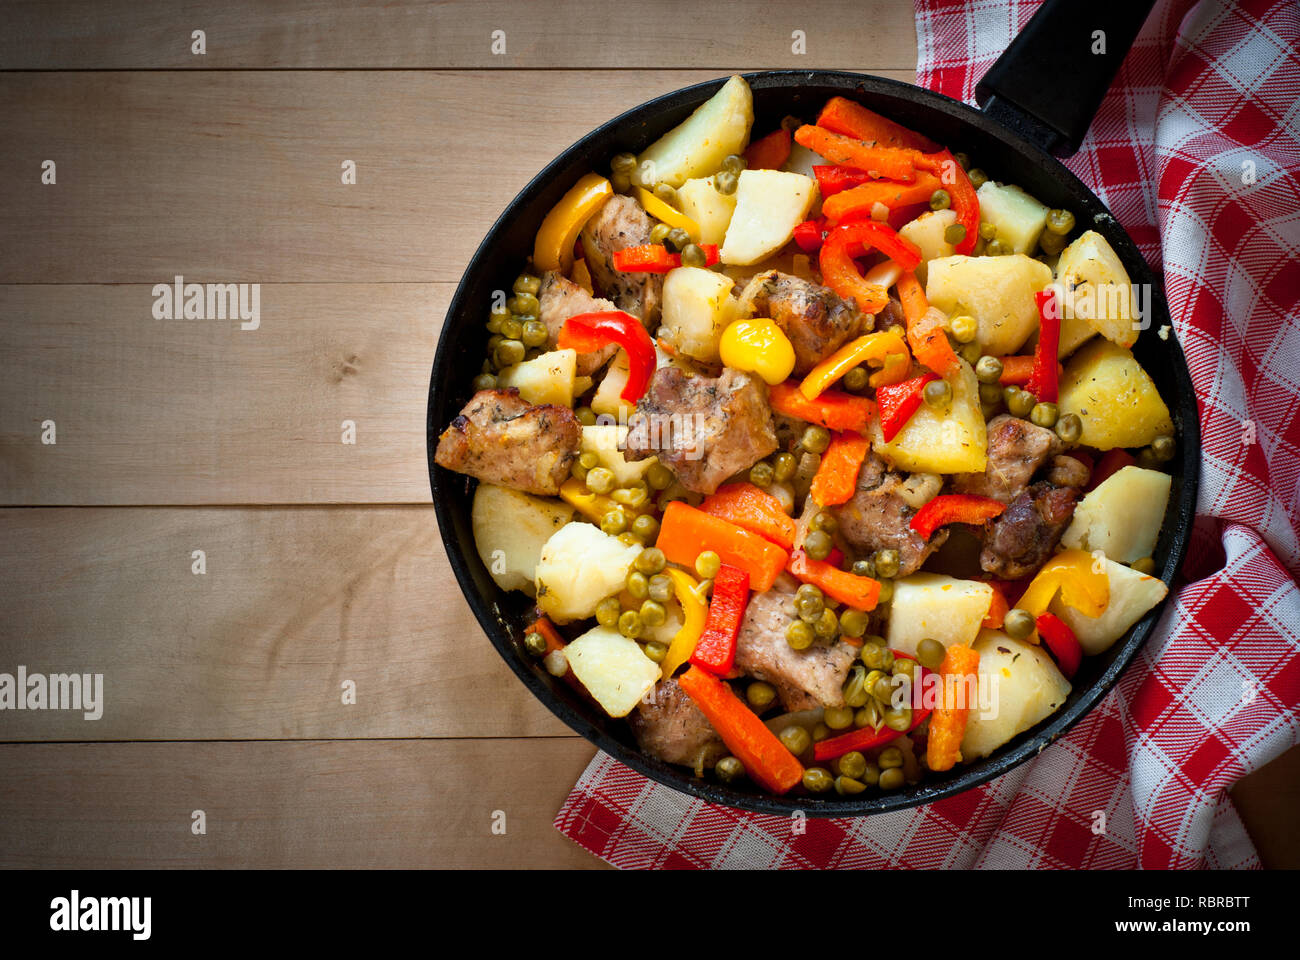 Meat with vegetables. Food in the frying pan. Main dish. Stock Photo